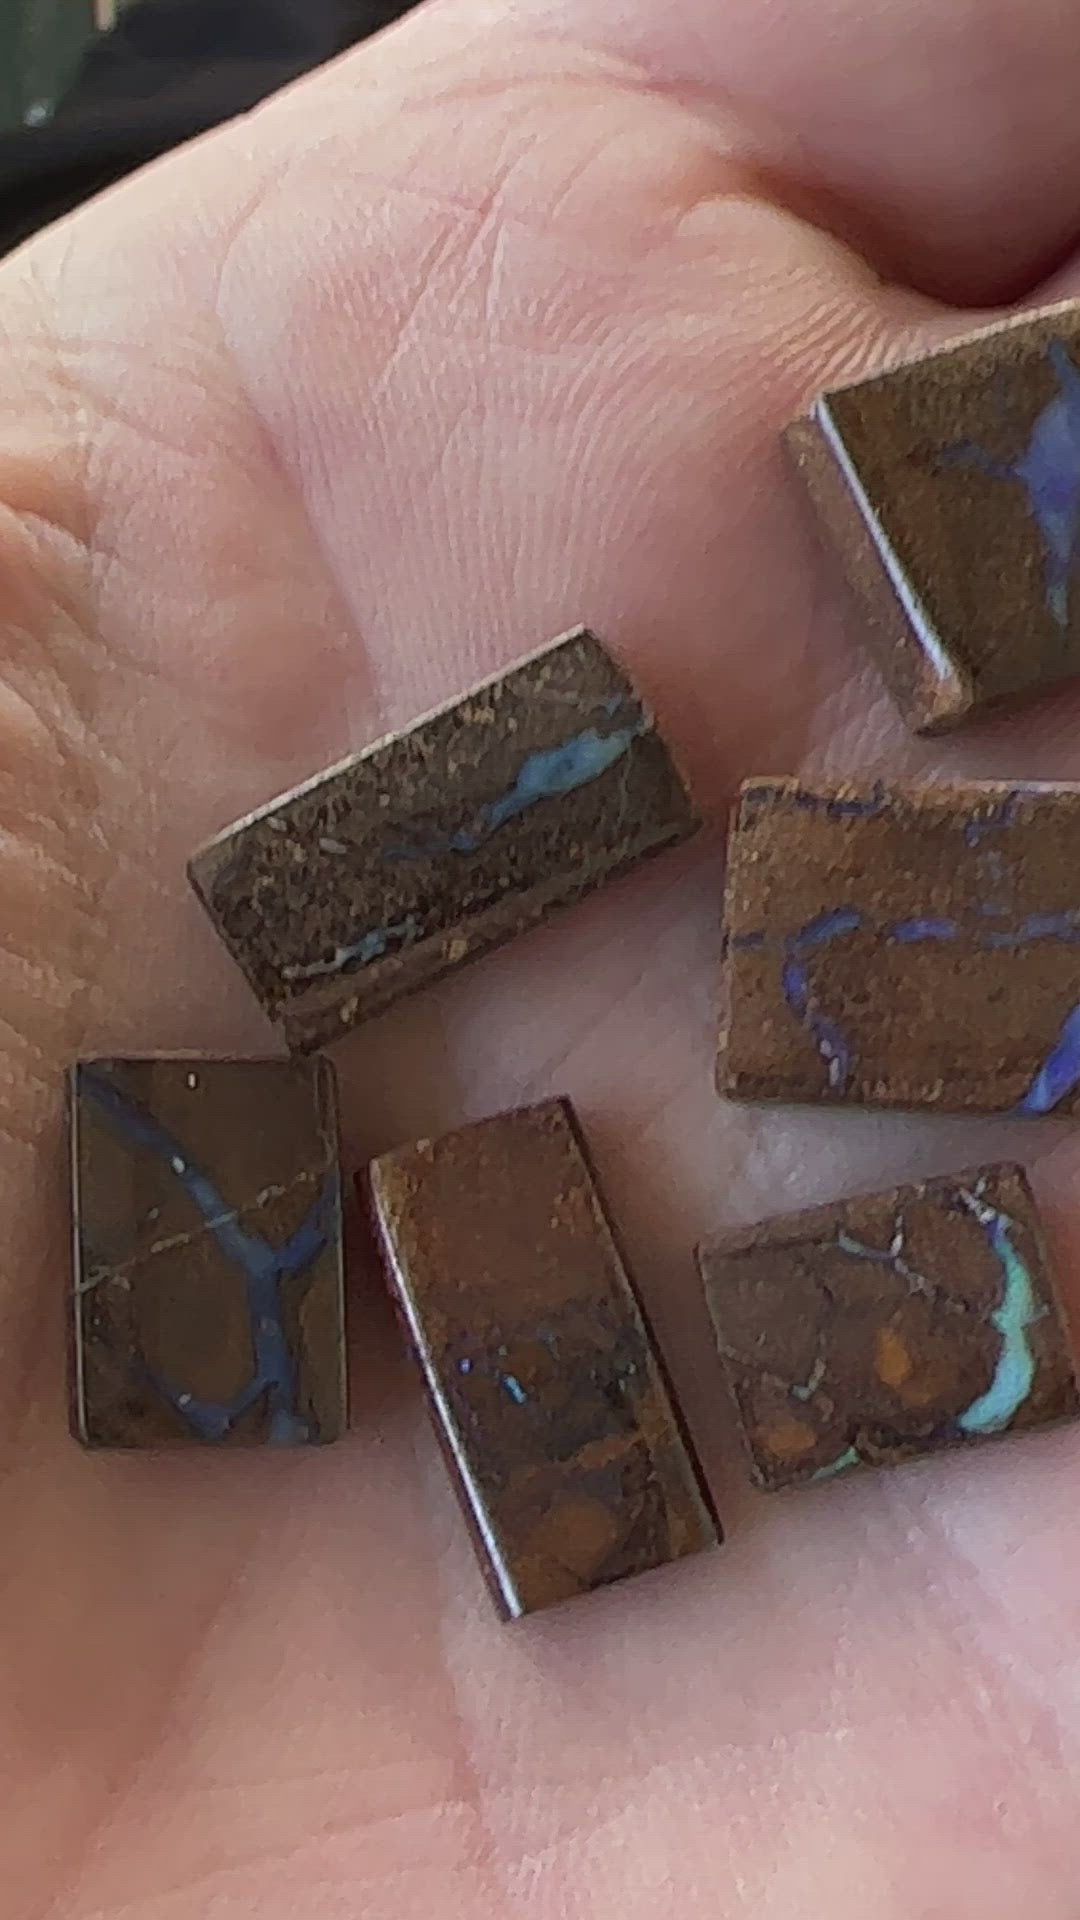 Six nice square cut boulder opals from Winton. Nice polish and ready for opal jewellery.